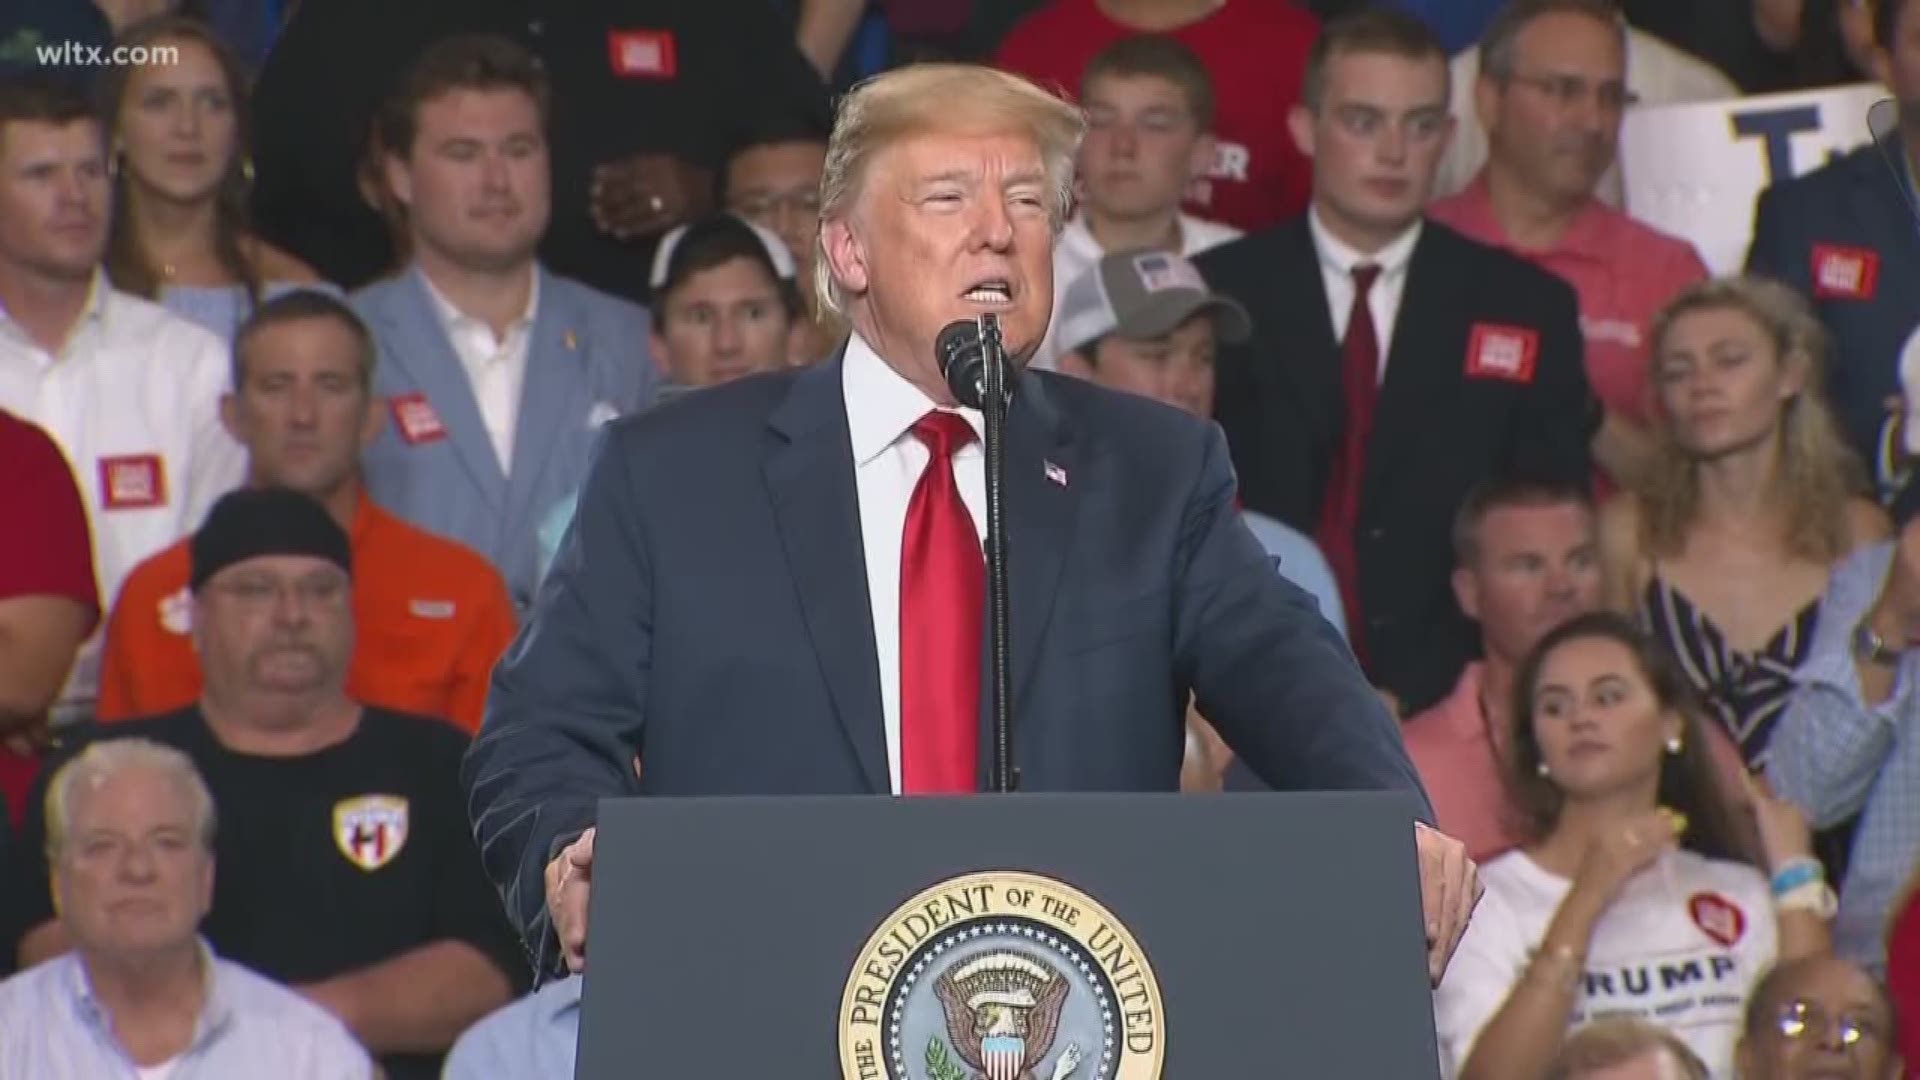 Watch all of President Donald Trump's rally in West Columbia, SC on June 26, 2018.